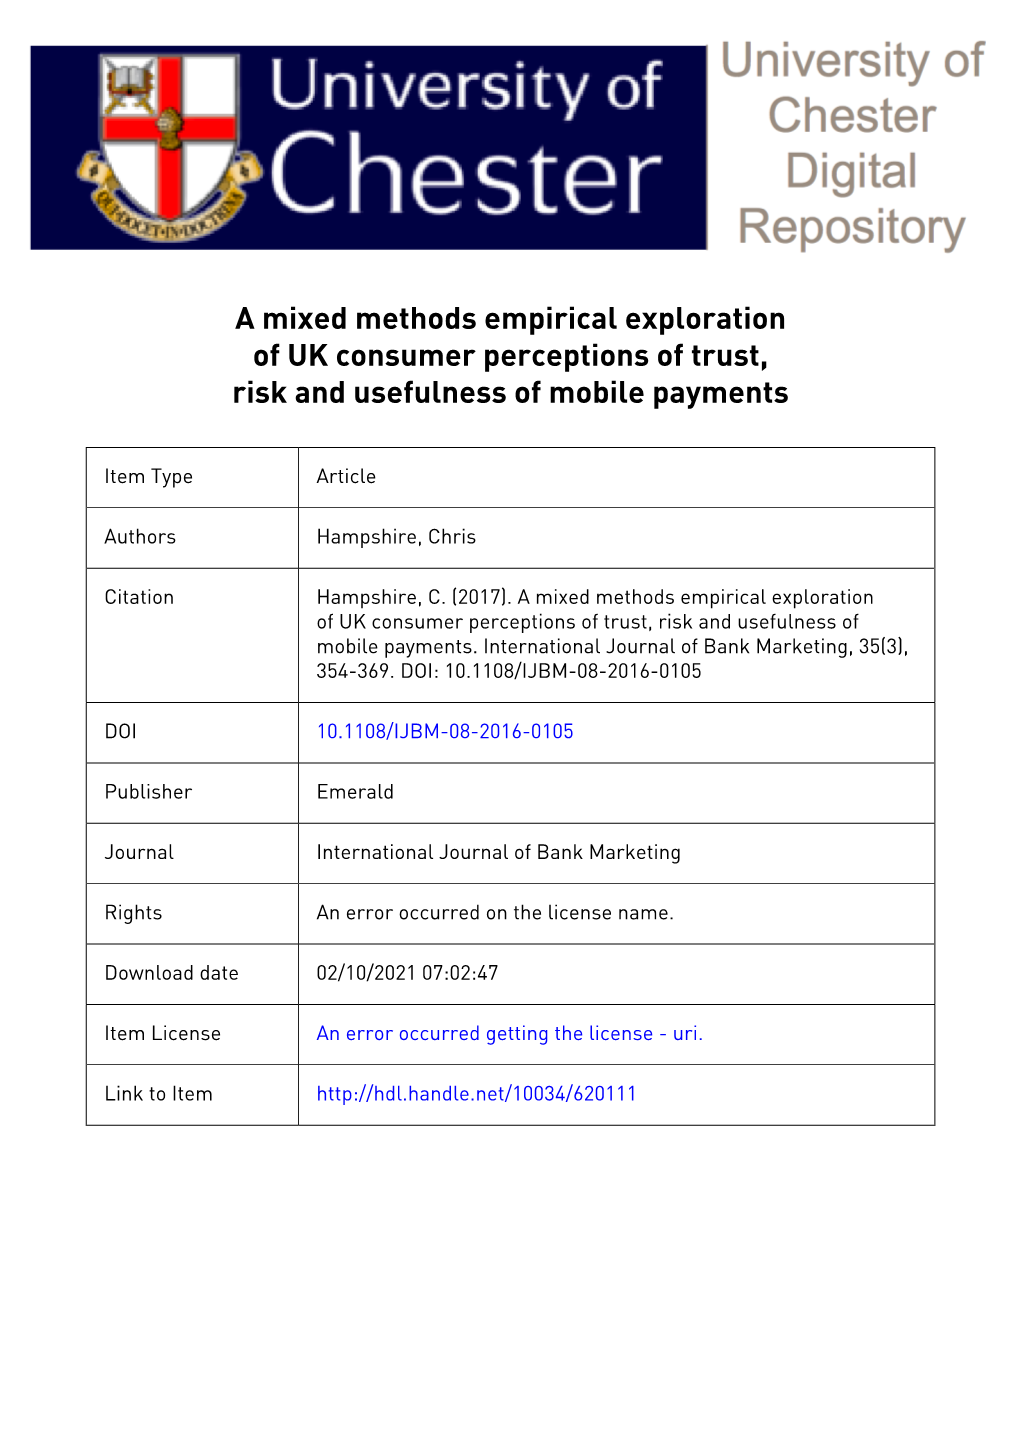 A Mixed Methods Empirical Exploration of UK Consumer Perceptions of Trust, Risk and Usefulness of Mobile Payments